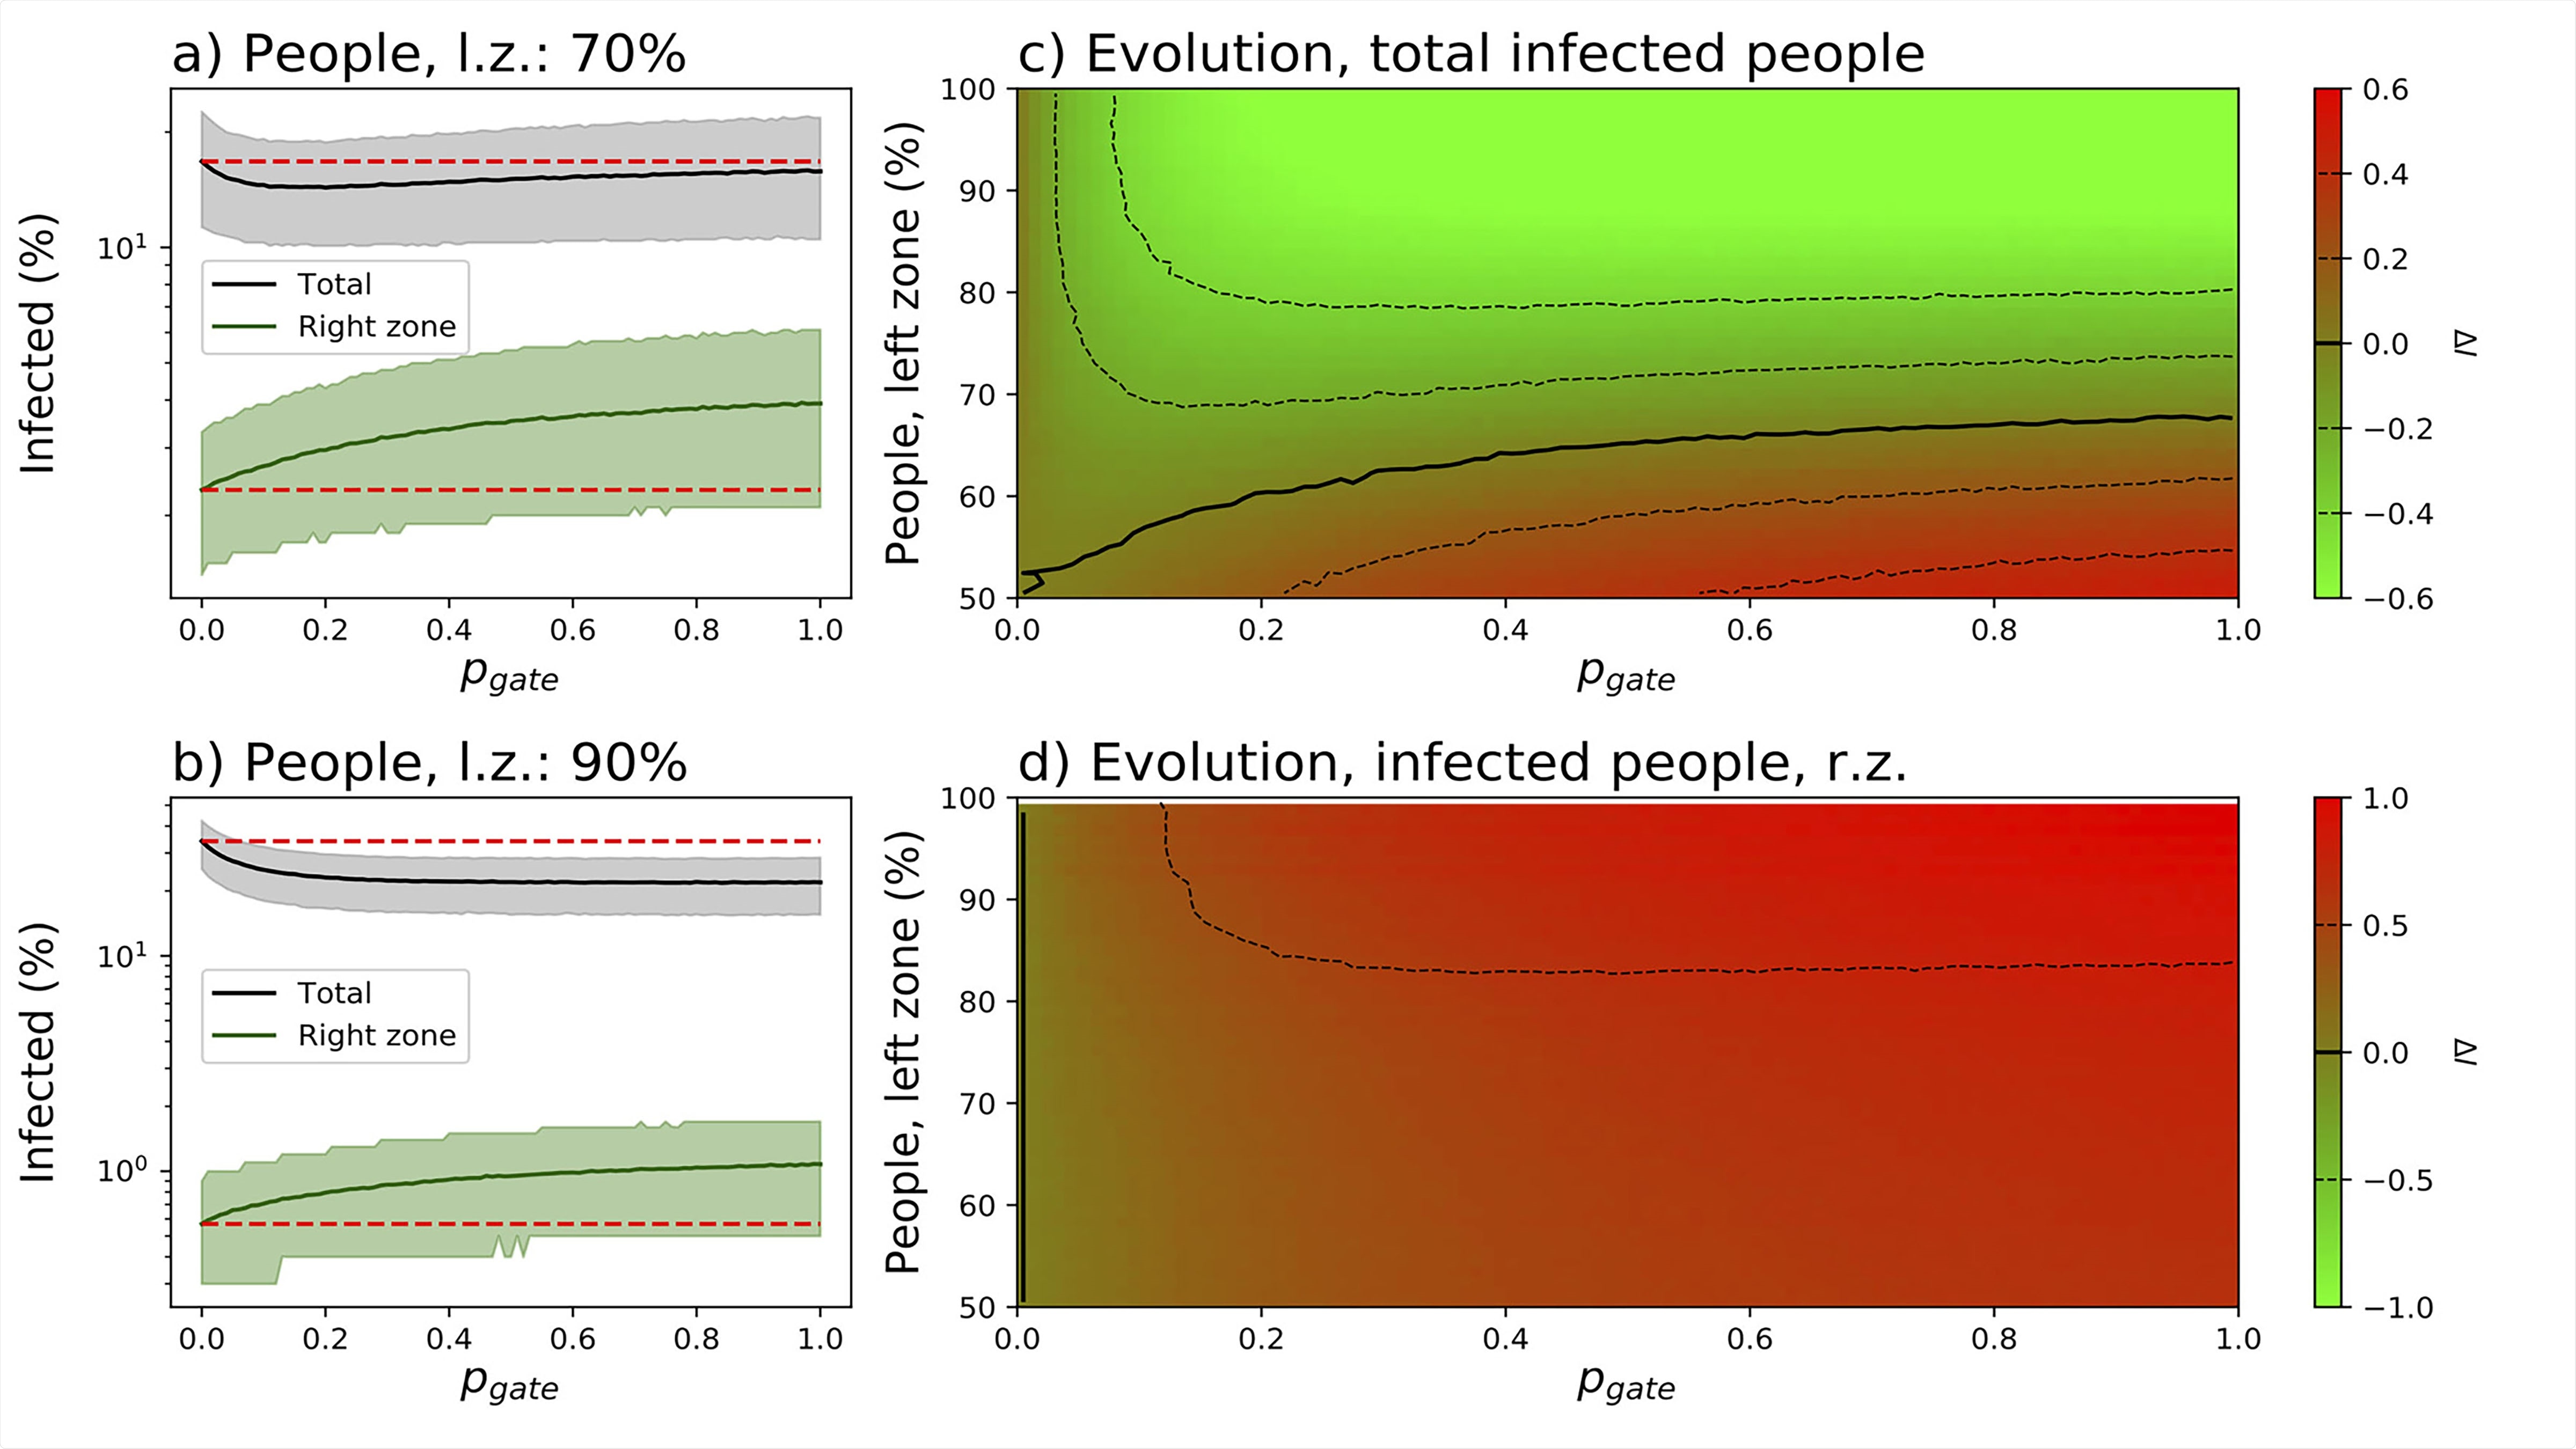 Evolution of infection in people as a function of asymmetry in population distribution shows that when the border from high density to low-density areas is closed, total overall disease spread doubles.